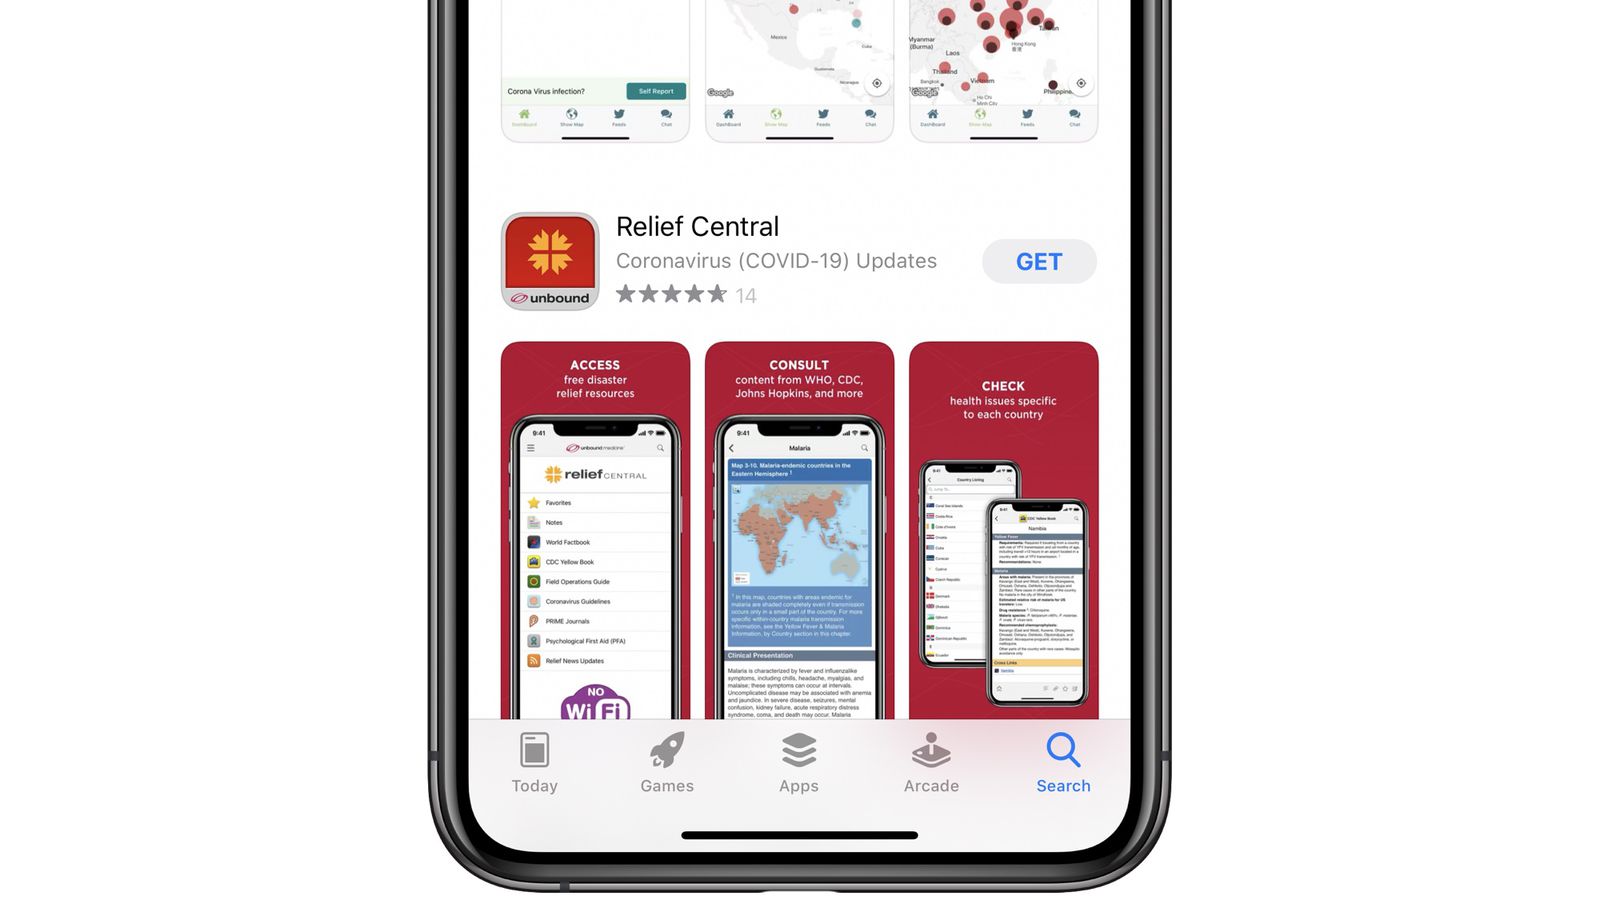 Apple Rejecting Coronavirus Apps Not From Health or Government Organizations  - MacRumors